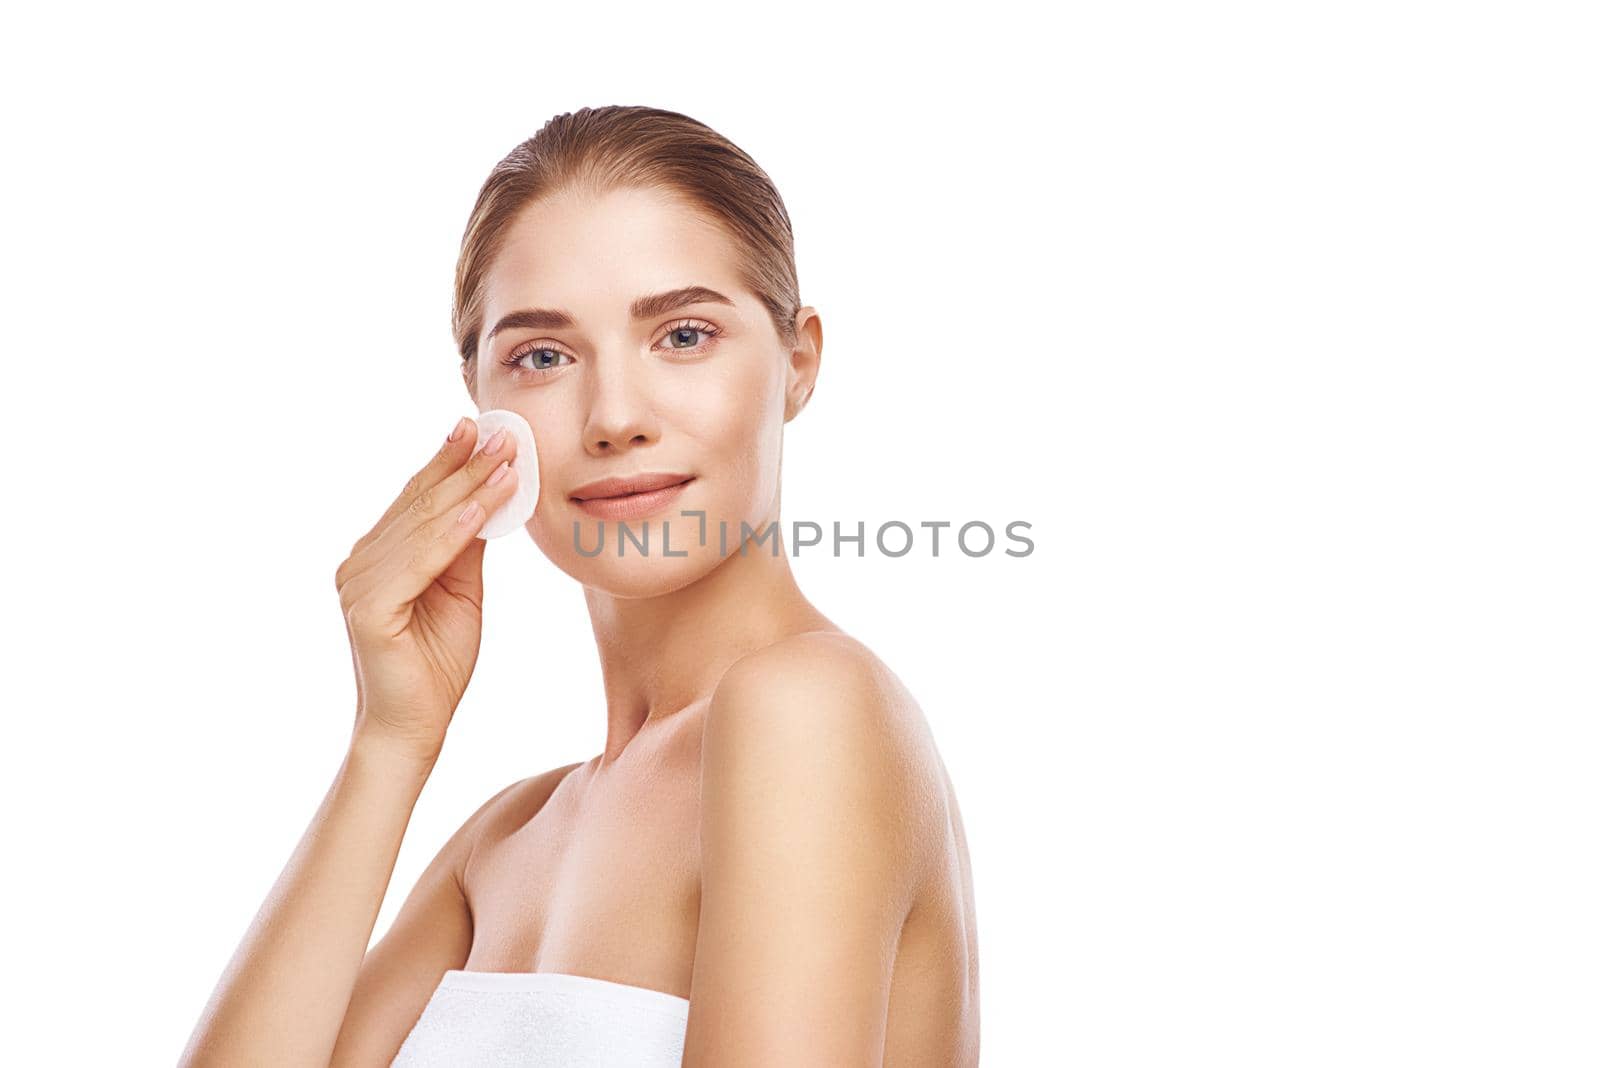 Beautiful woman cleans her face with sponge, she wearing white towel, close-up studio photo on white background. Light hair, grey eyes